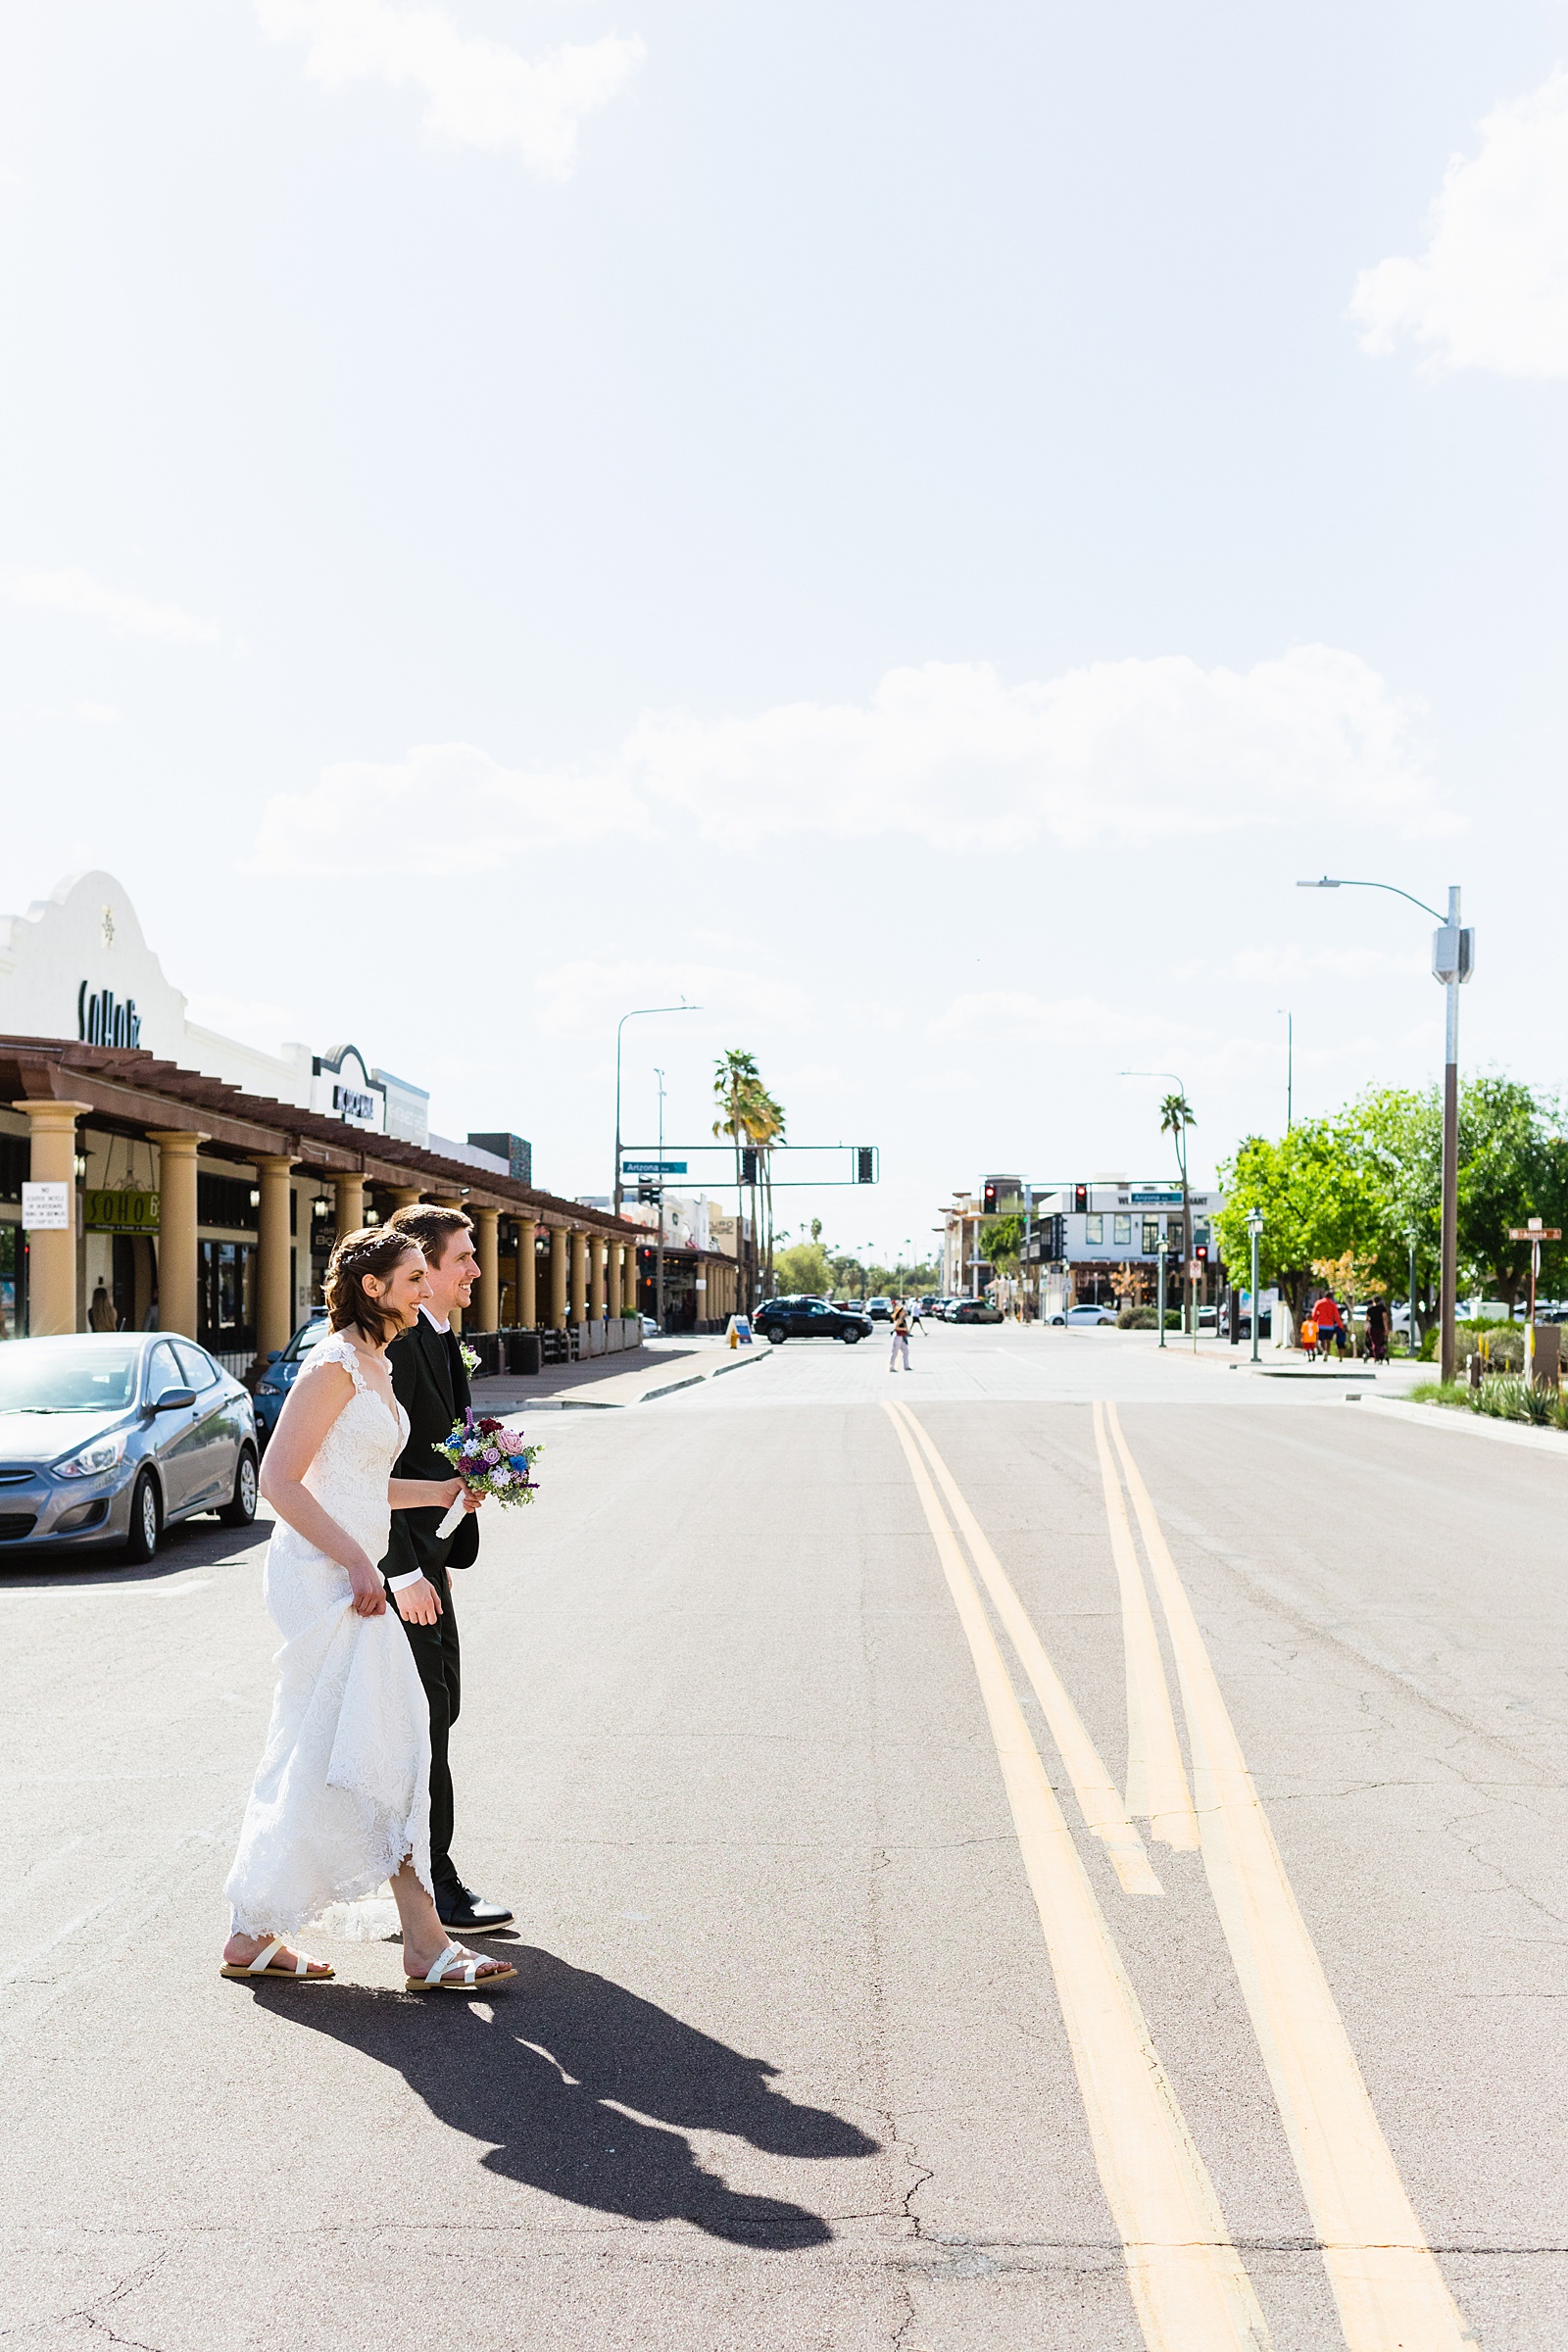 Bride and groom walking together during their Chandler Community Center wedding by Chandler wedding photographer PMA Photography.